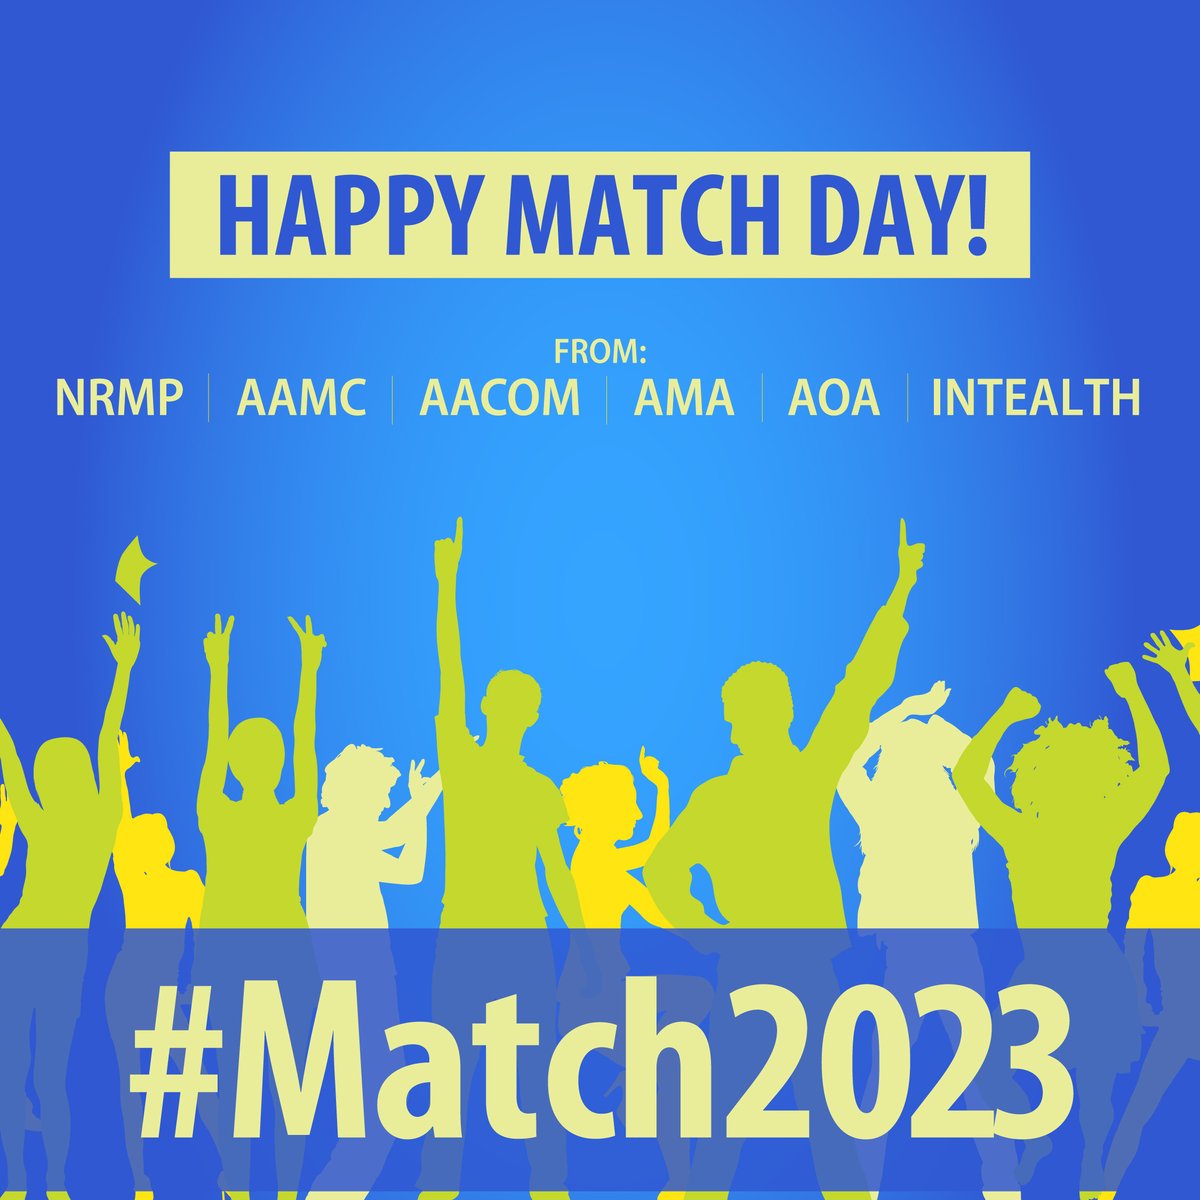 NRMP® on Twitter "Happy Match Day to all! Match results will be